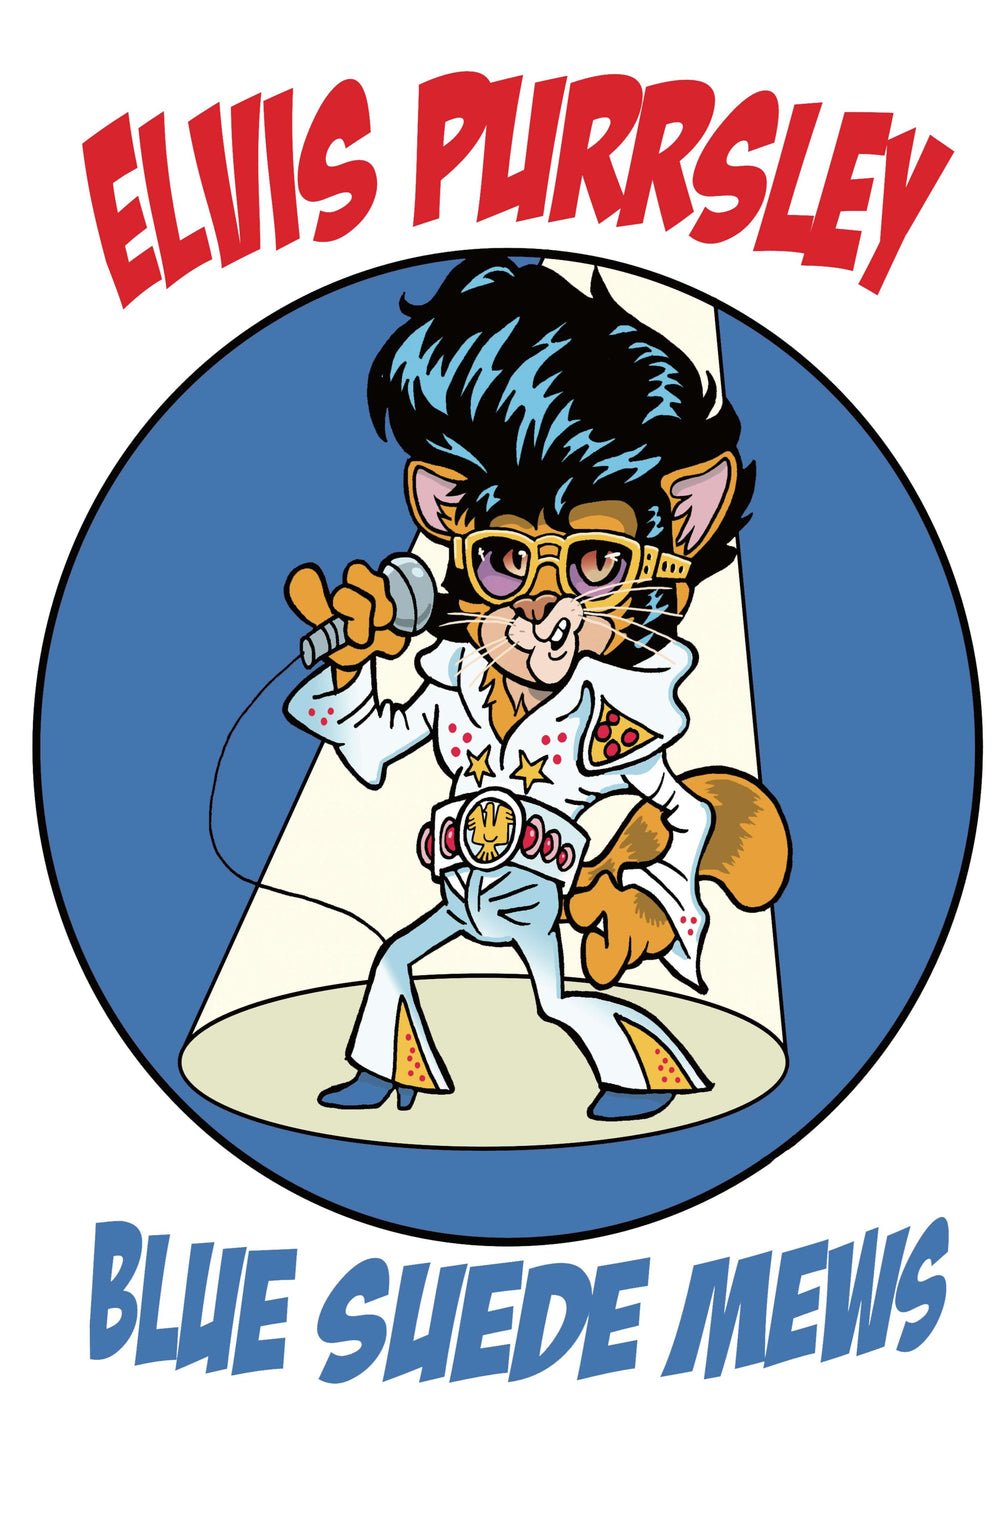 Elvis Purrsley Cat Greeting Card and Matching Tea Towel - Gift Set